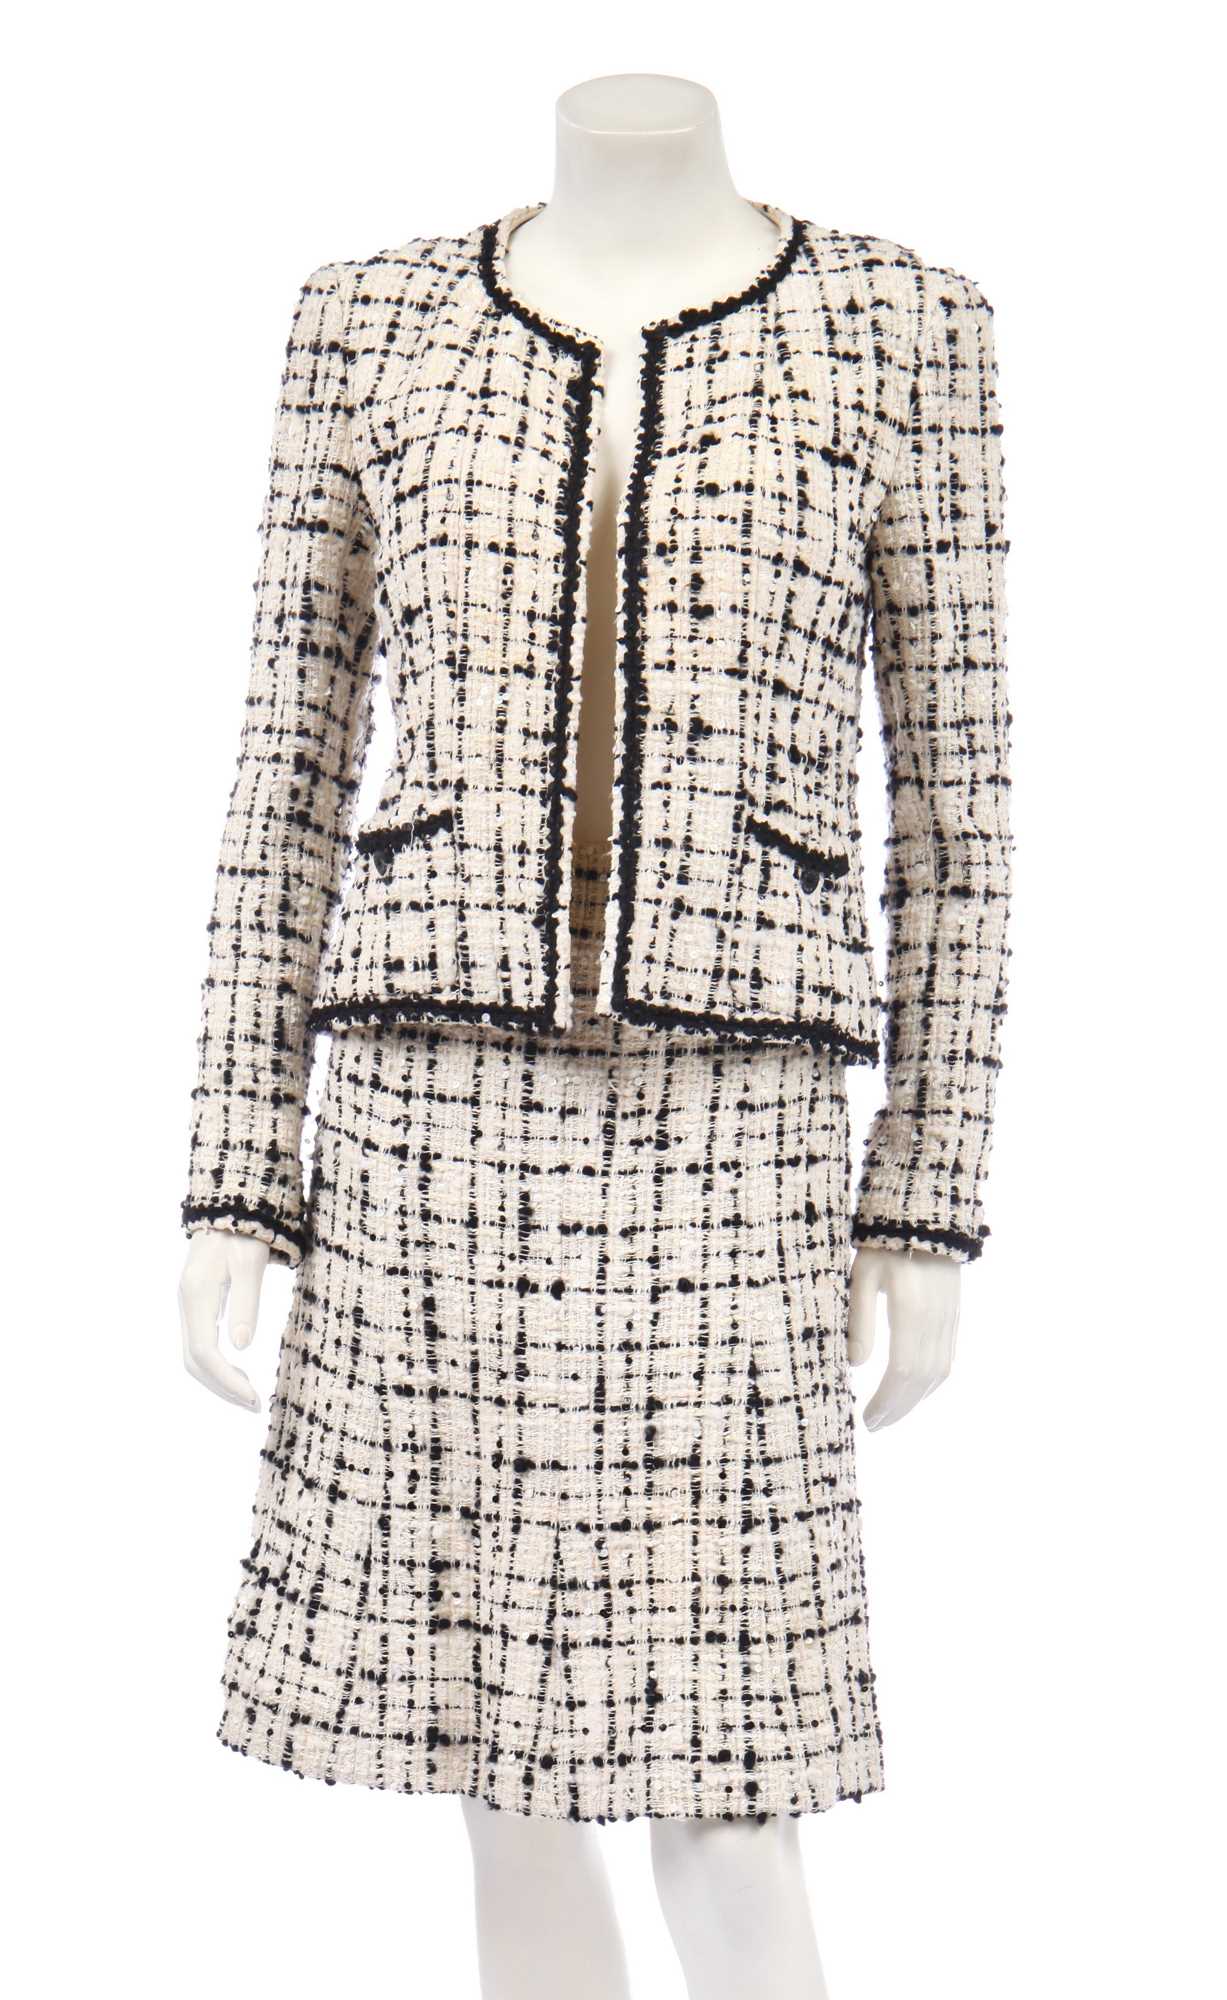 Lot 10 - A Chanel bouclé tweed suit, Cruise collection